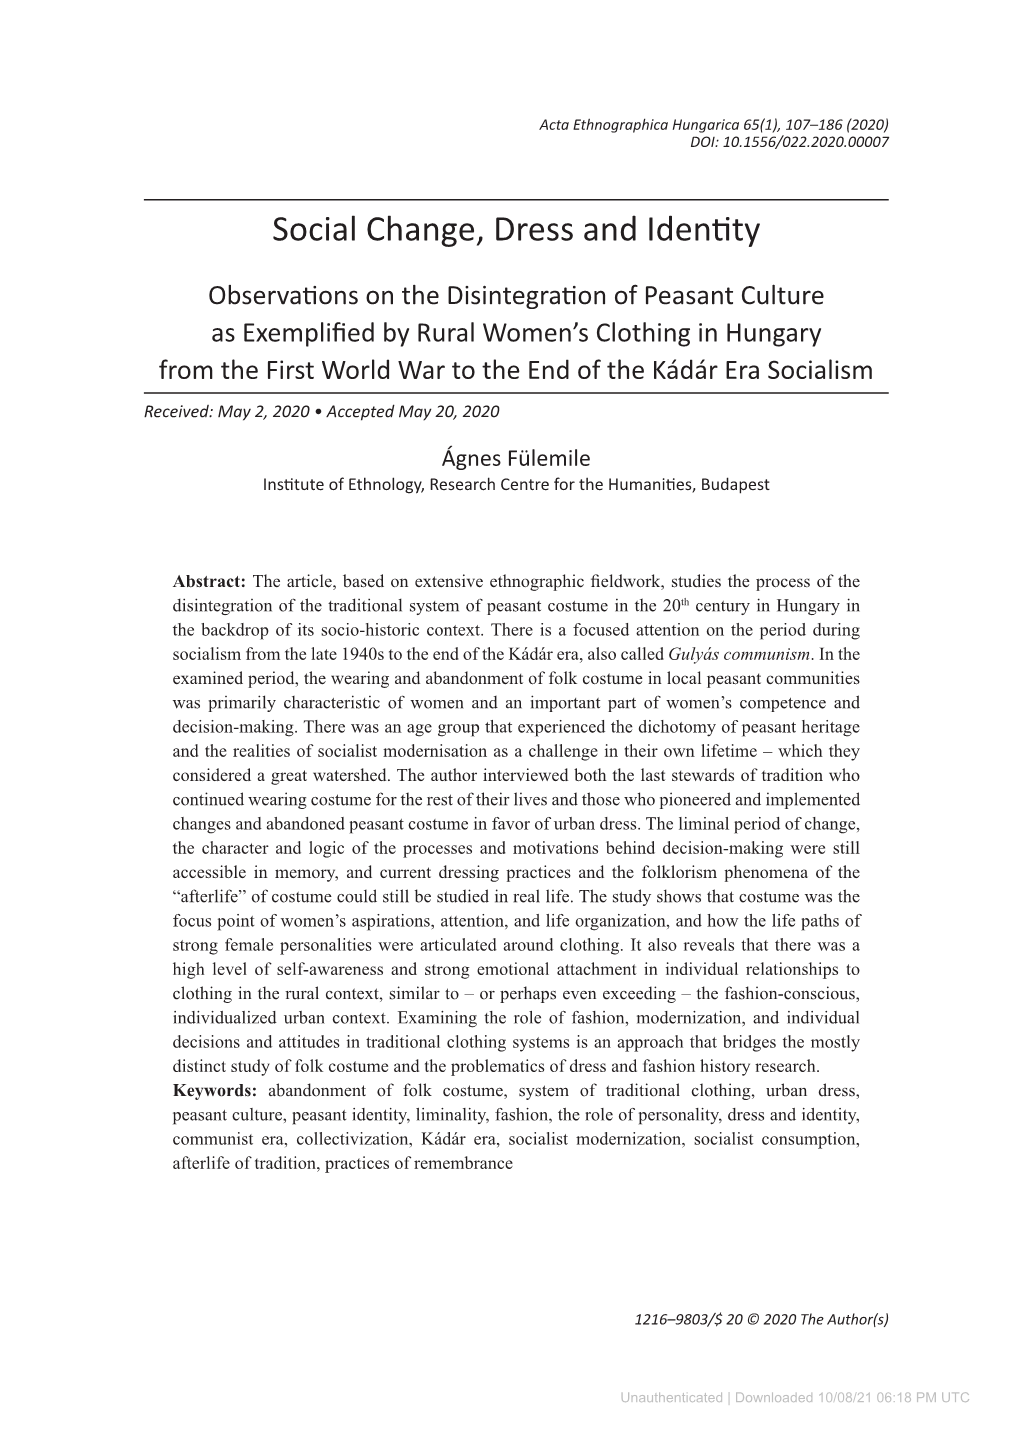 Social Change, Dress and Identity